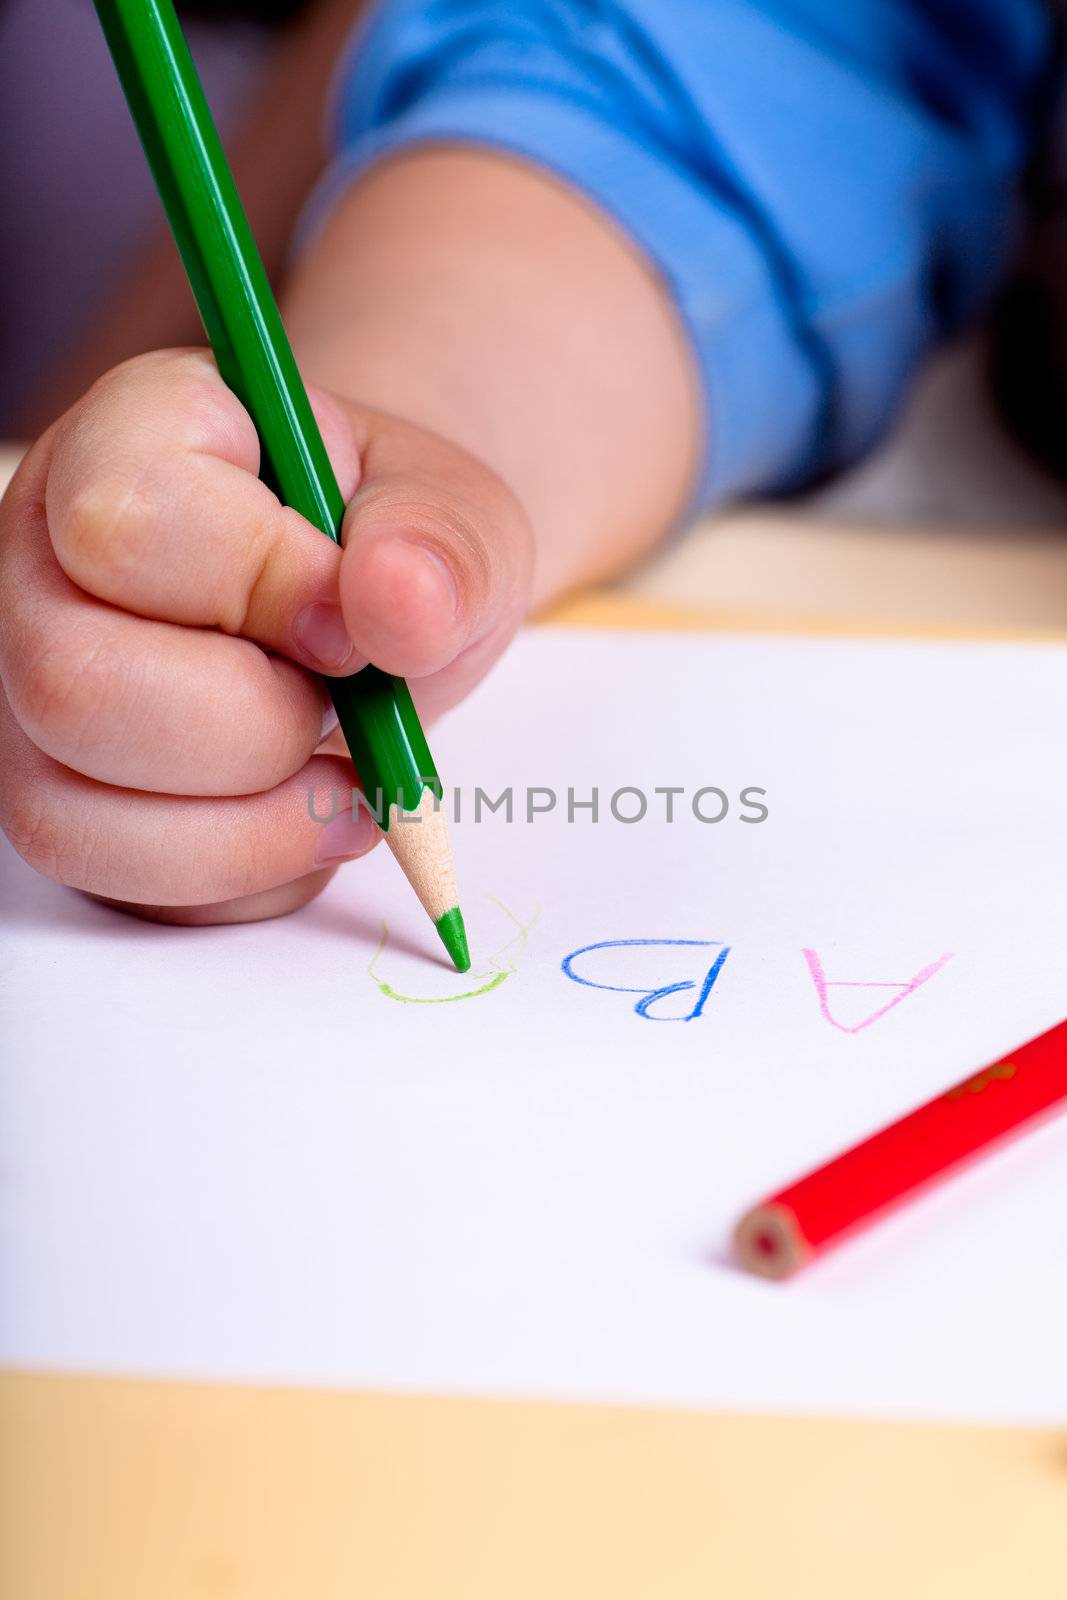 Child's hand writing letters with gree pencil